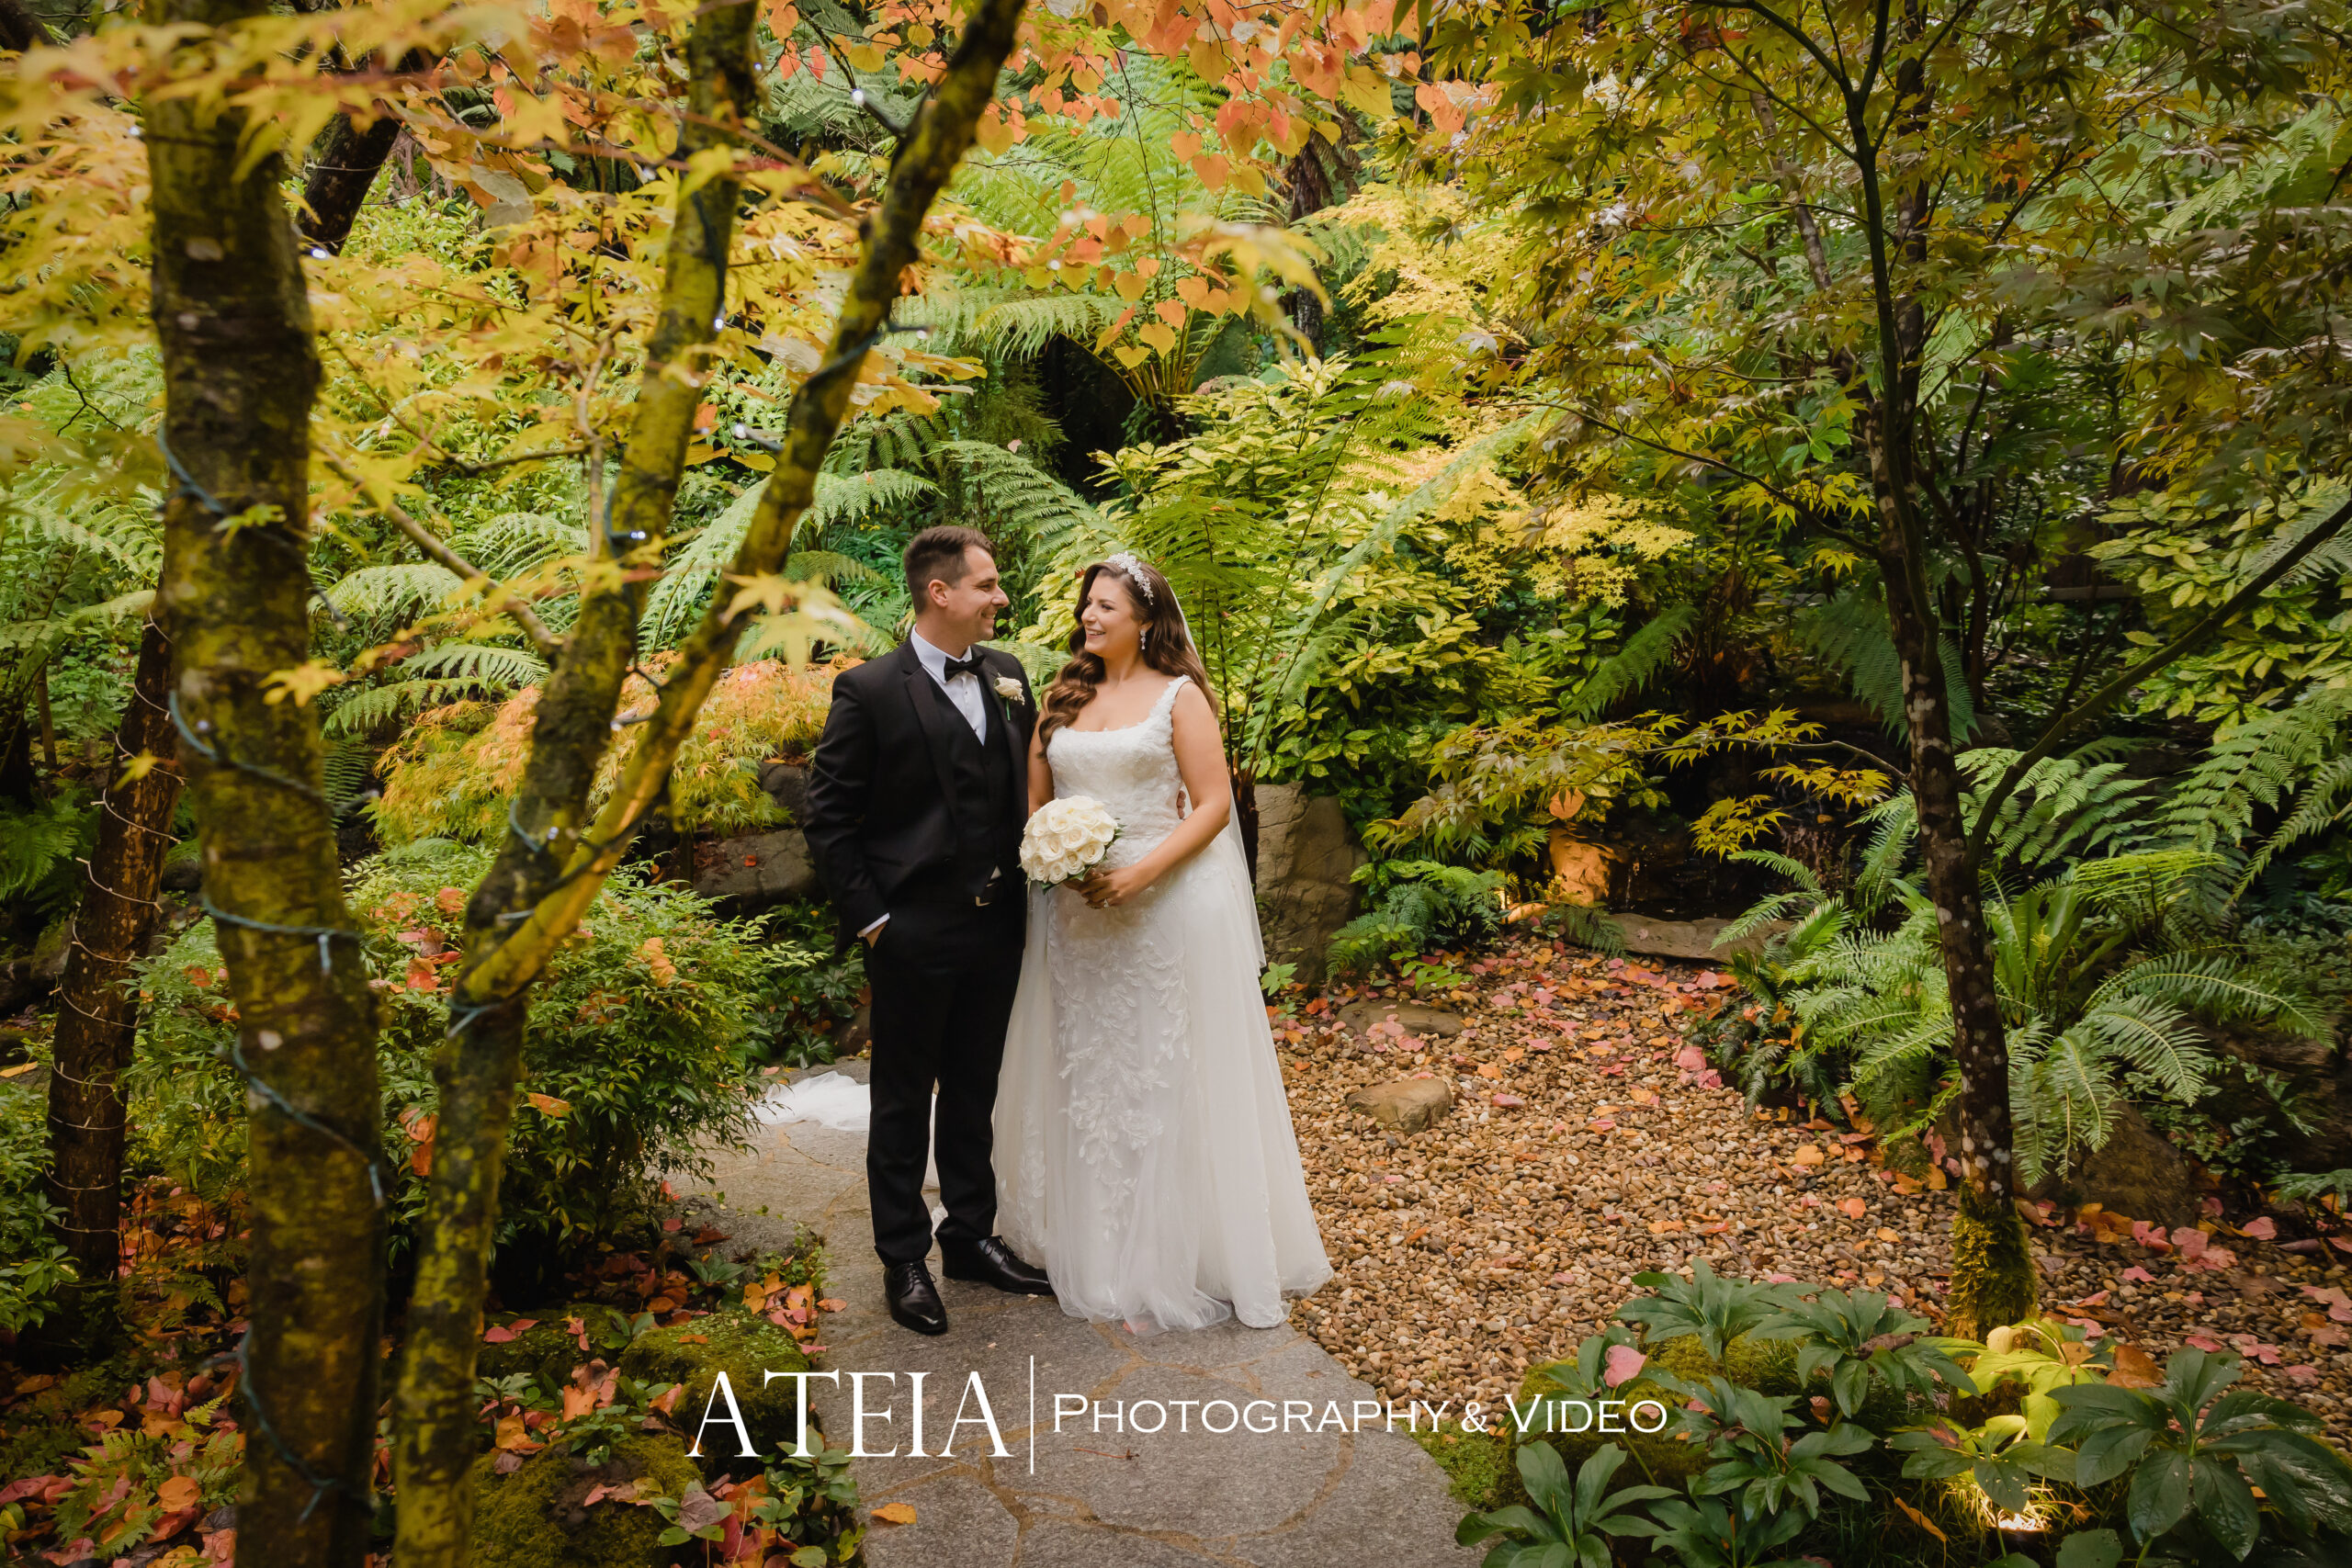 , Natalie and Riccardo&#8217;s wedding at Lyrebird Falls captured by ATEIA Photography &#038; Video